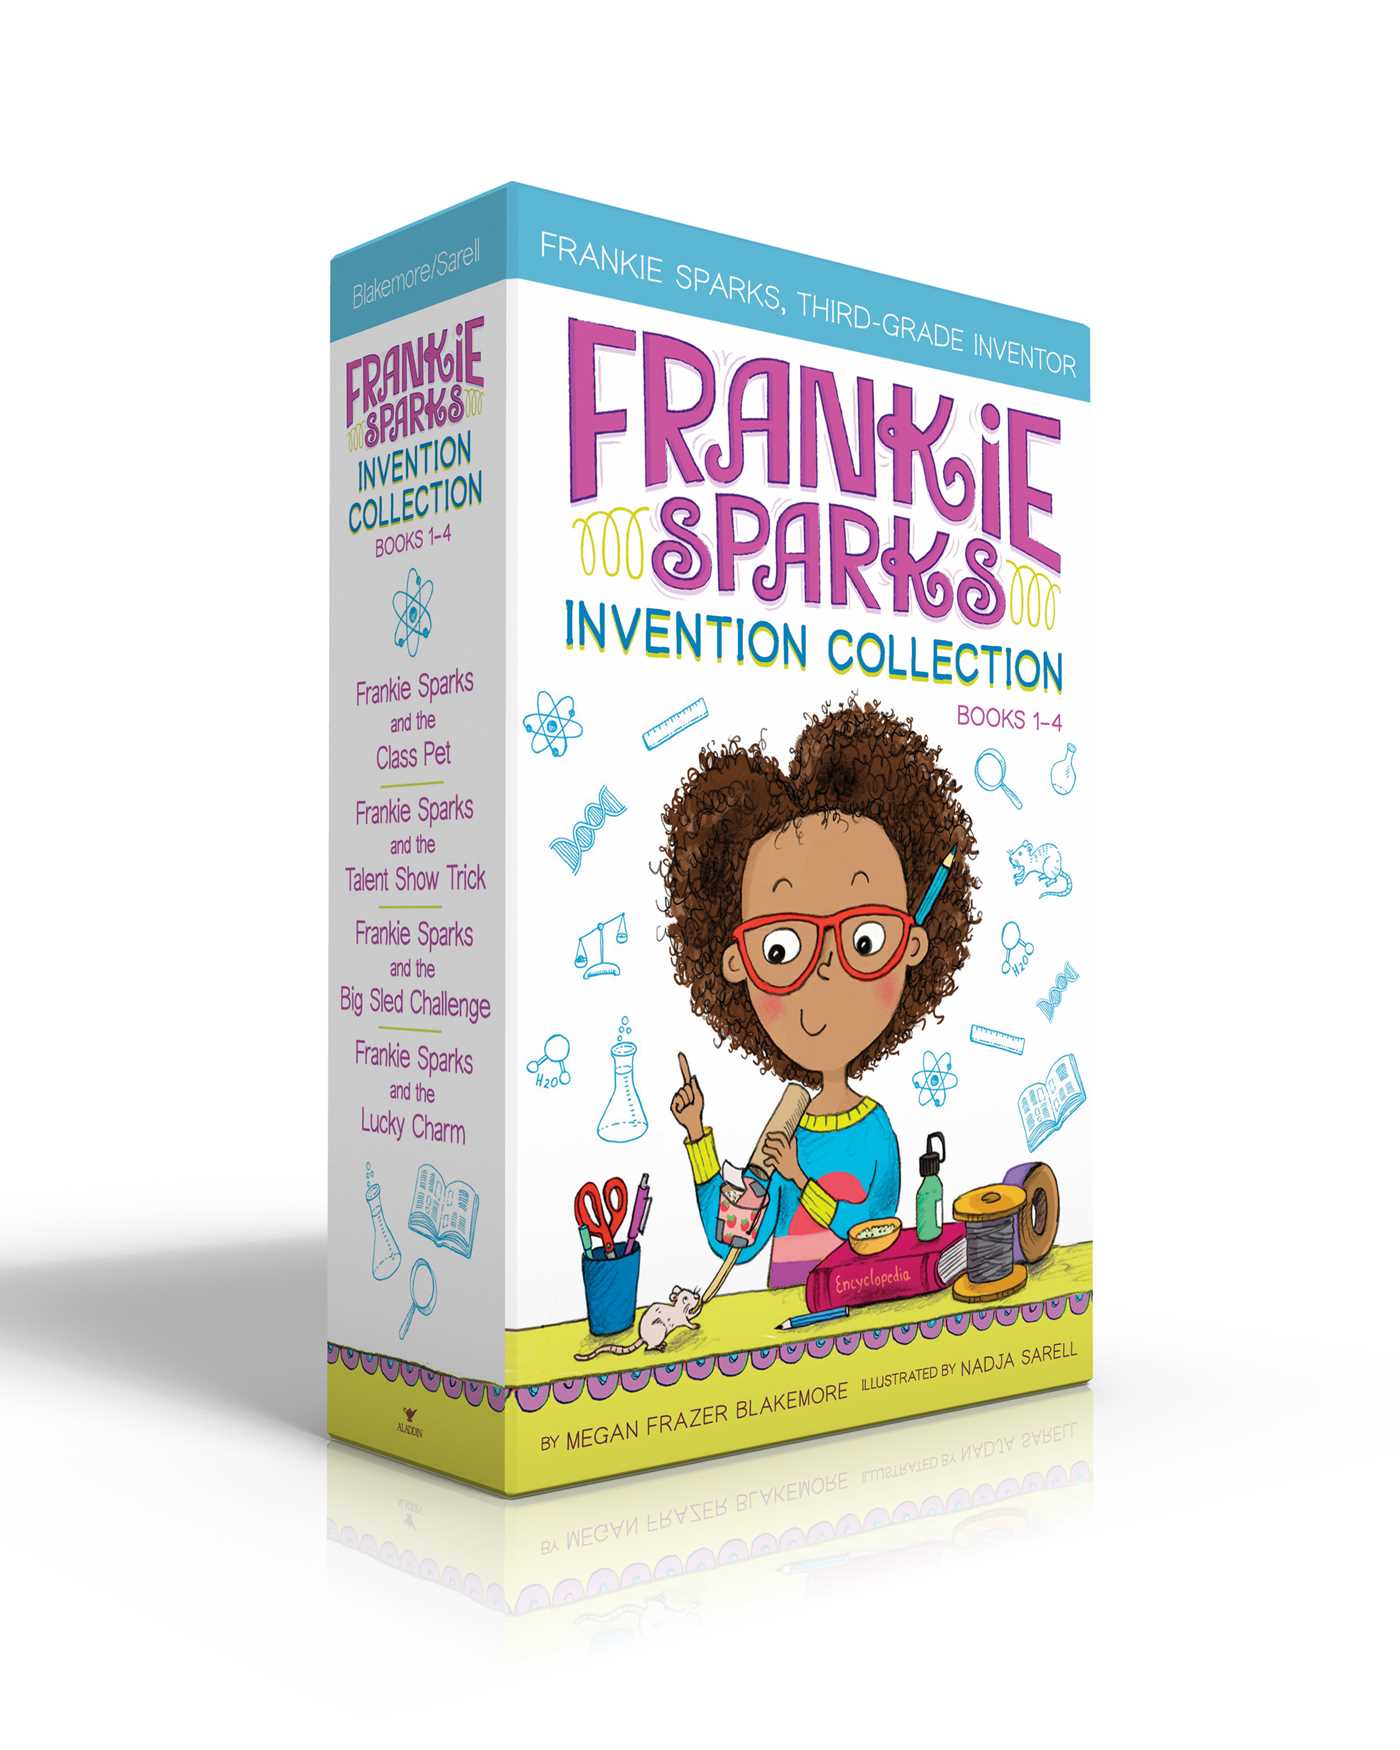 Frankie Sparks Invention Collection Books 1-4 (Boxed Set)